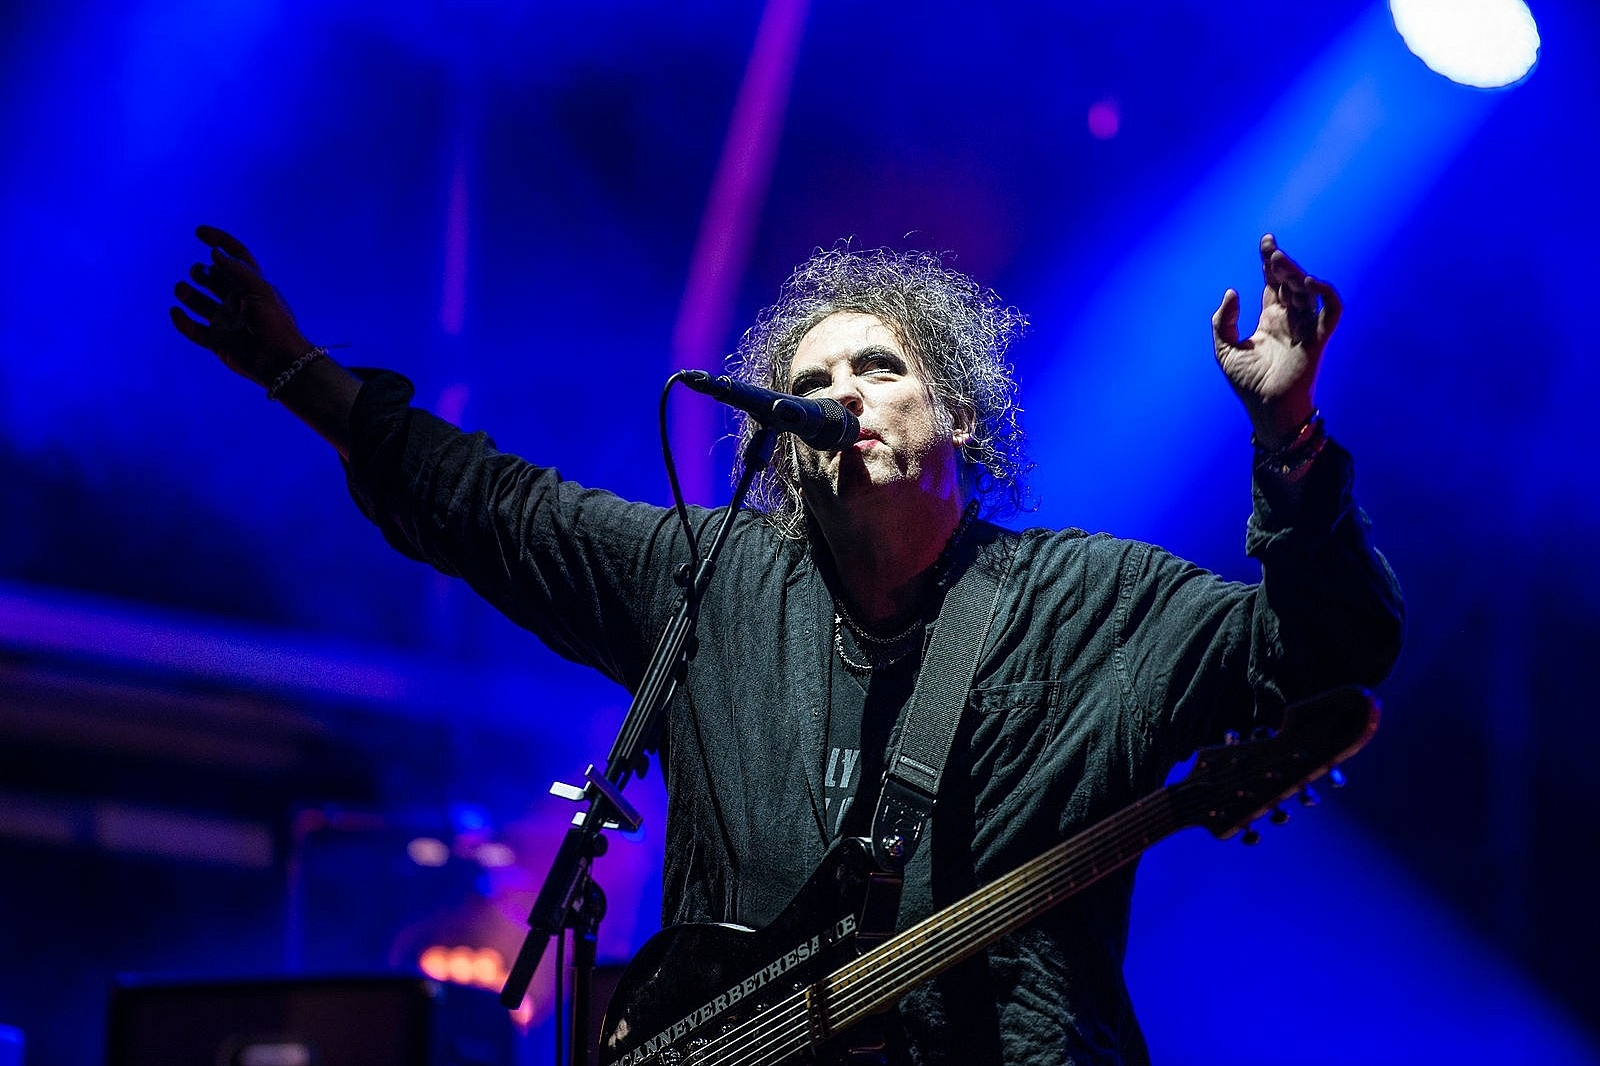 The Cure to play 2019 edition of Glasgow Summer Sessions 